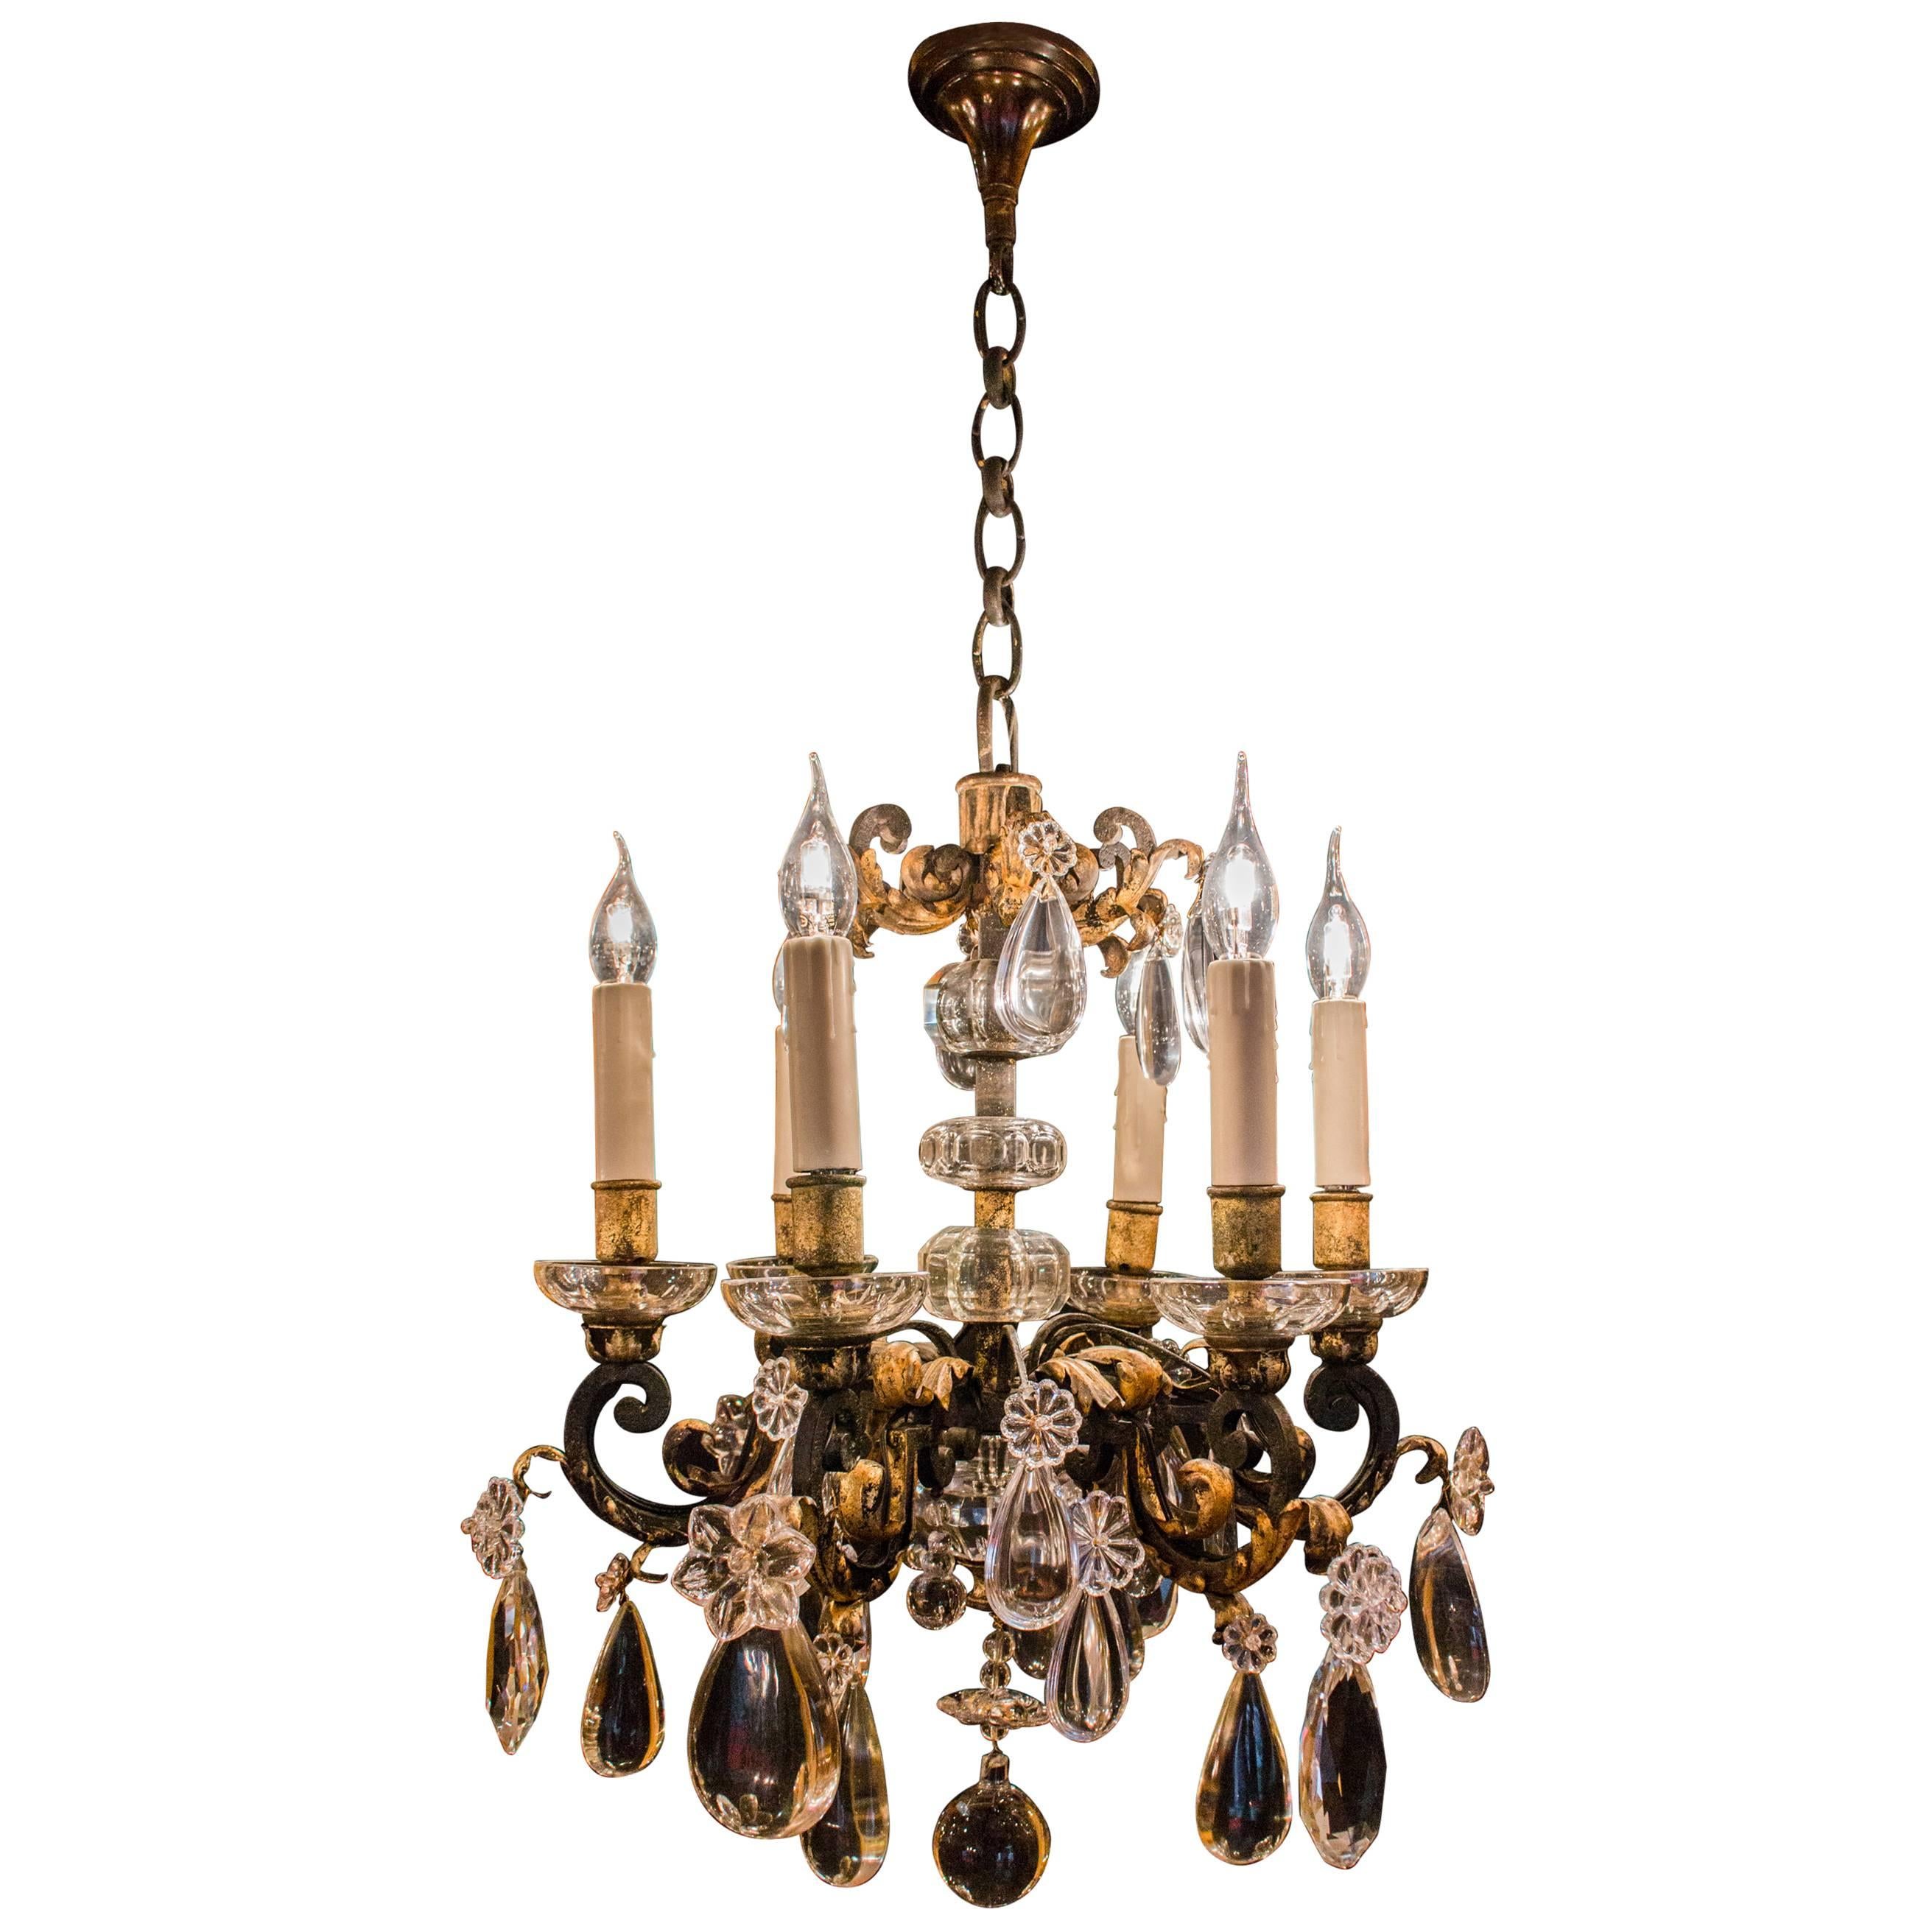 French Iron and Crystal Chandelier Attributed to Maison Baguès, circa 1940